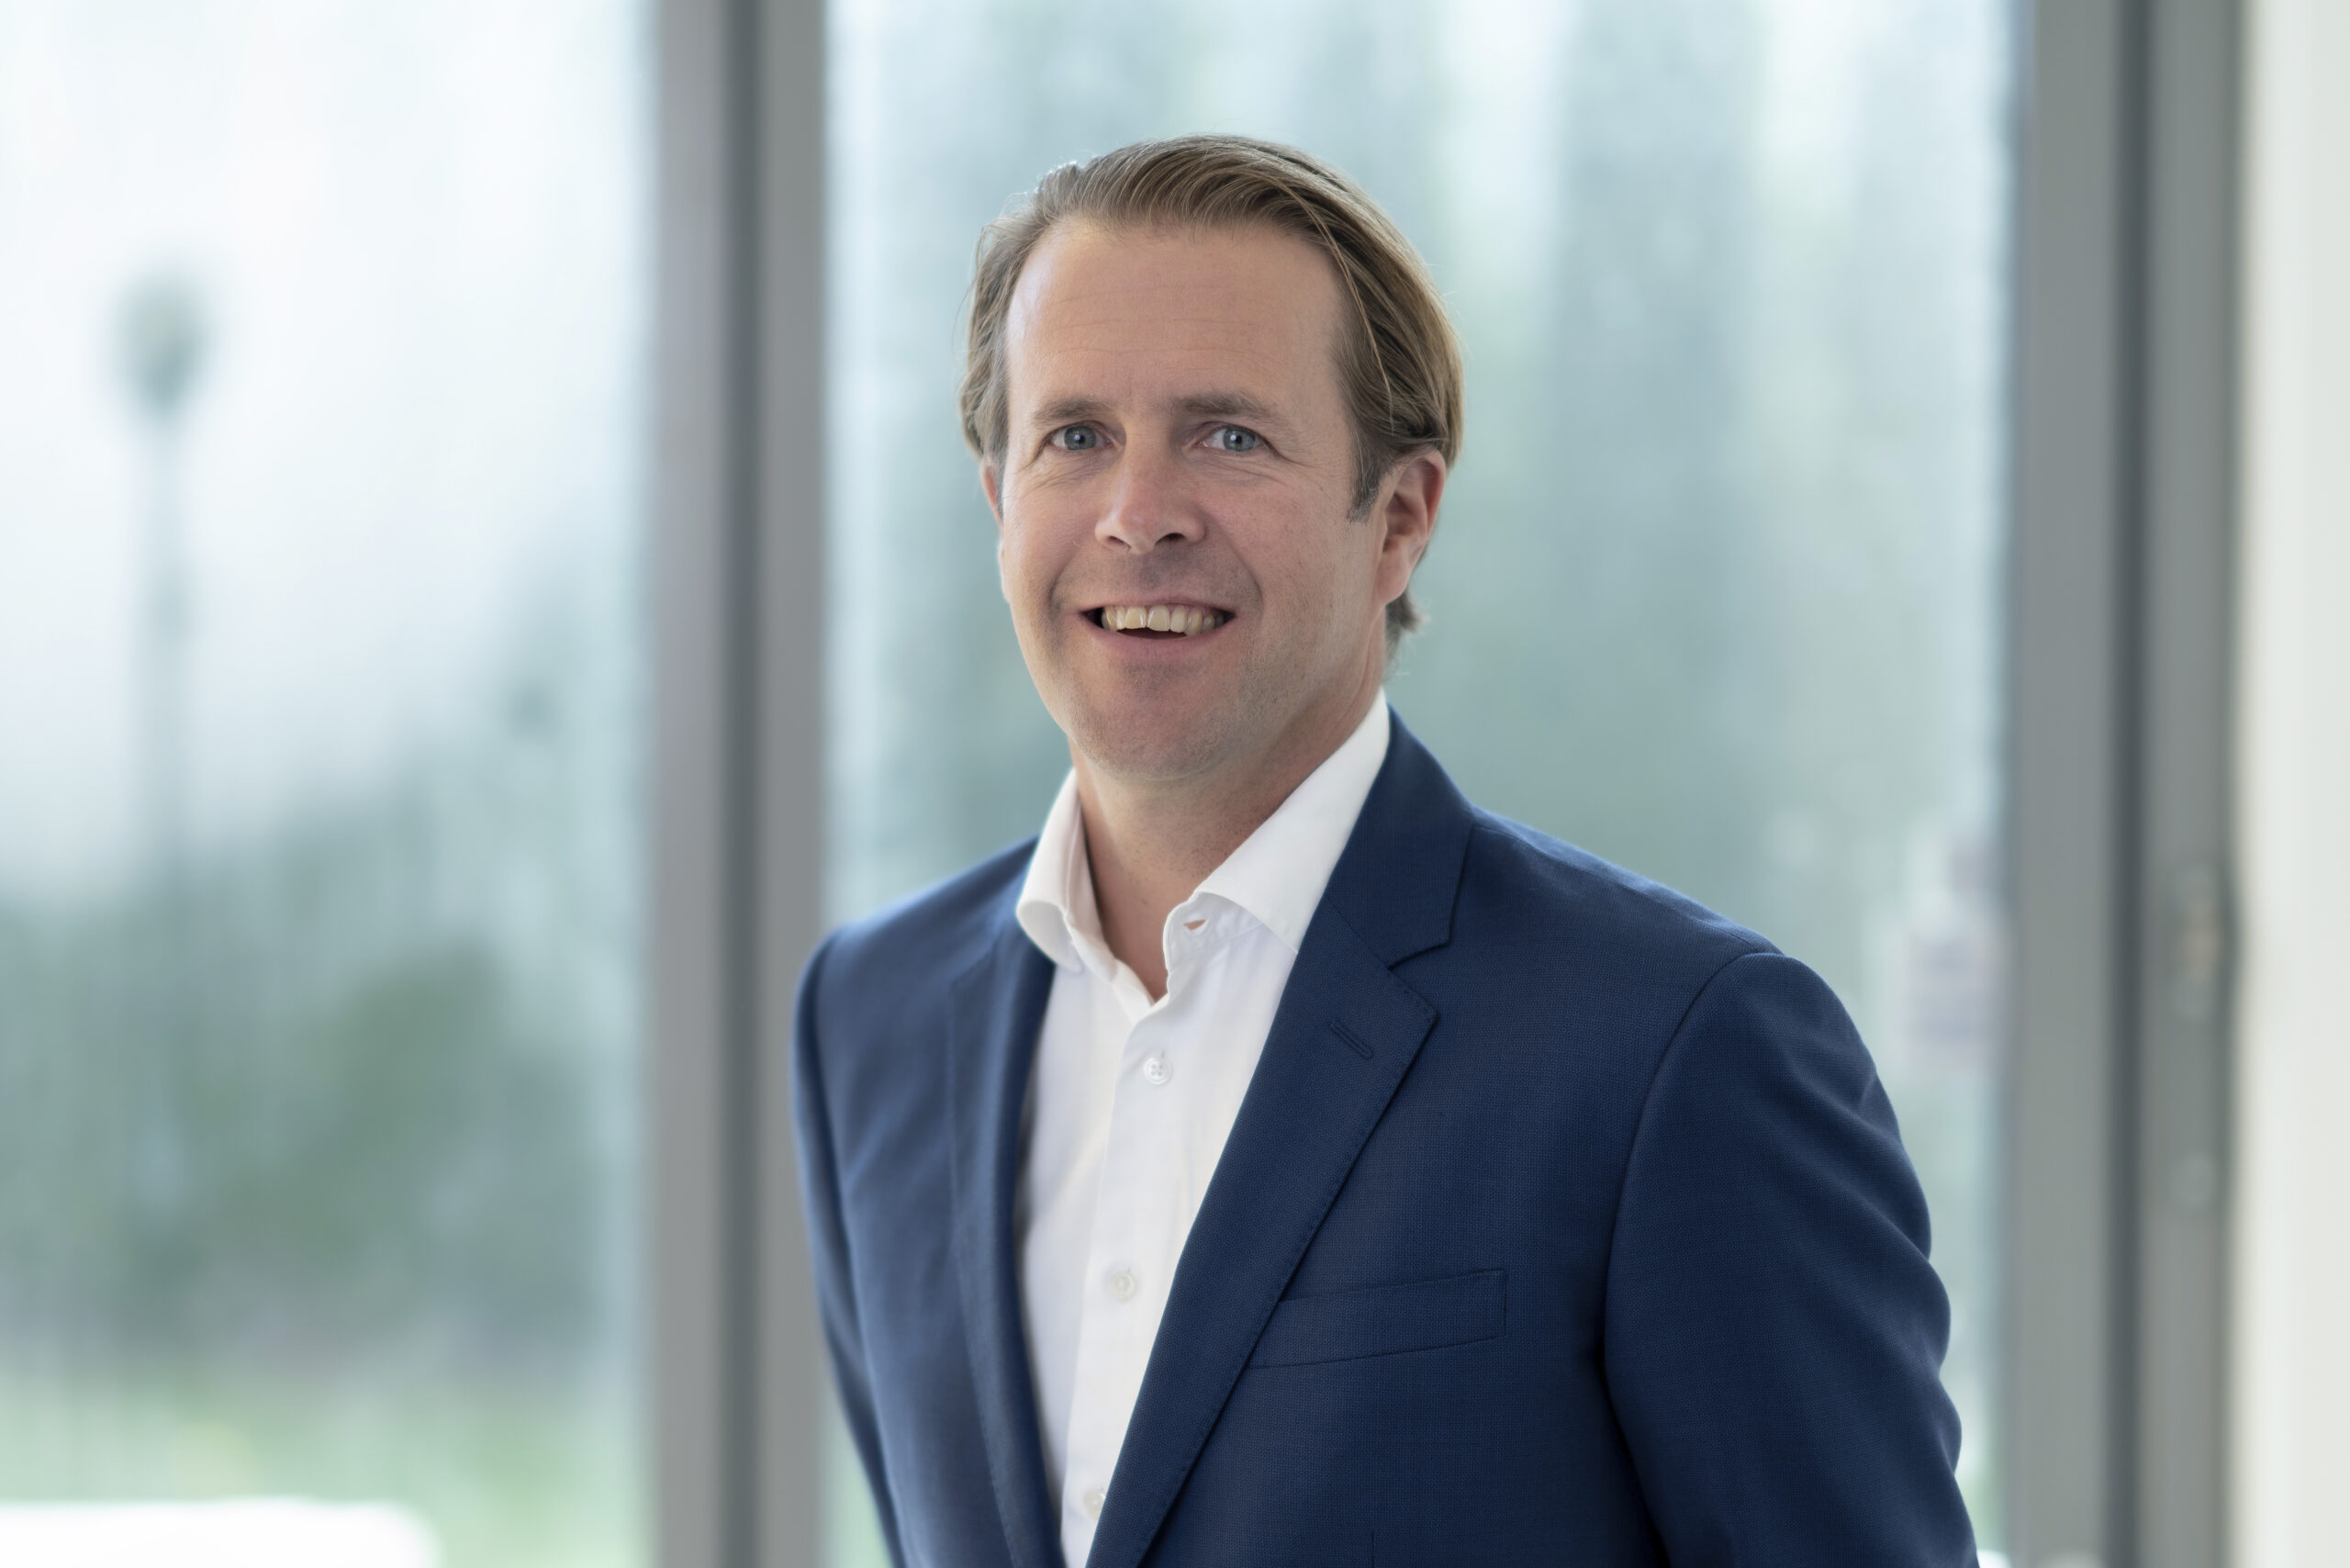 MEMBER NEWS: Miros Mocean appoints new CEO